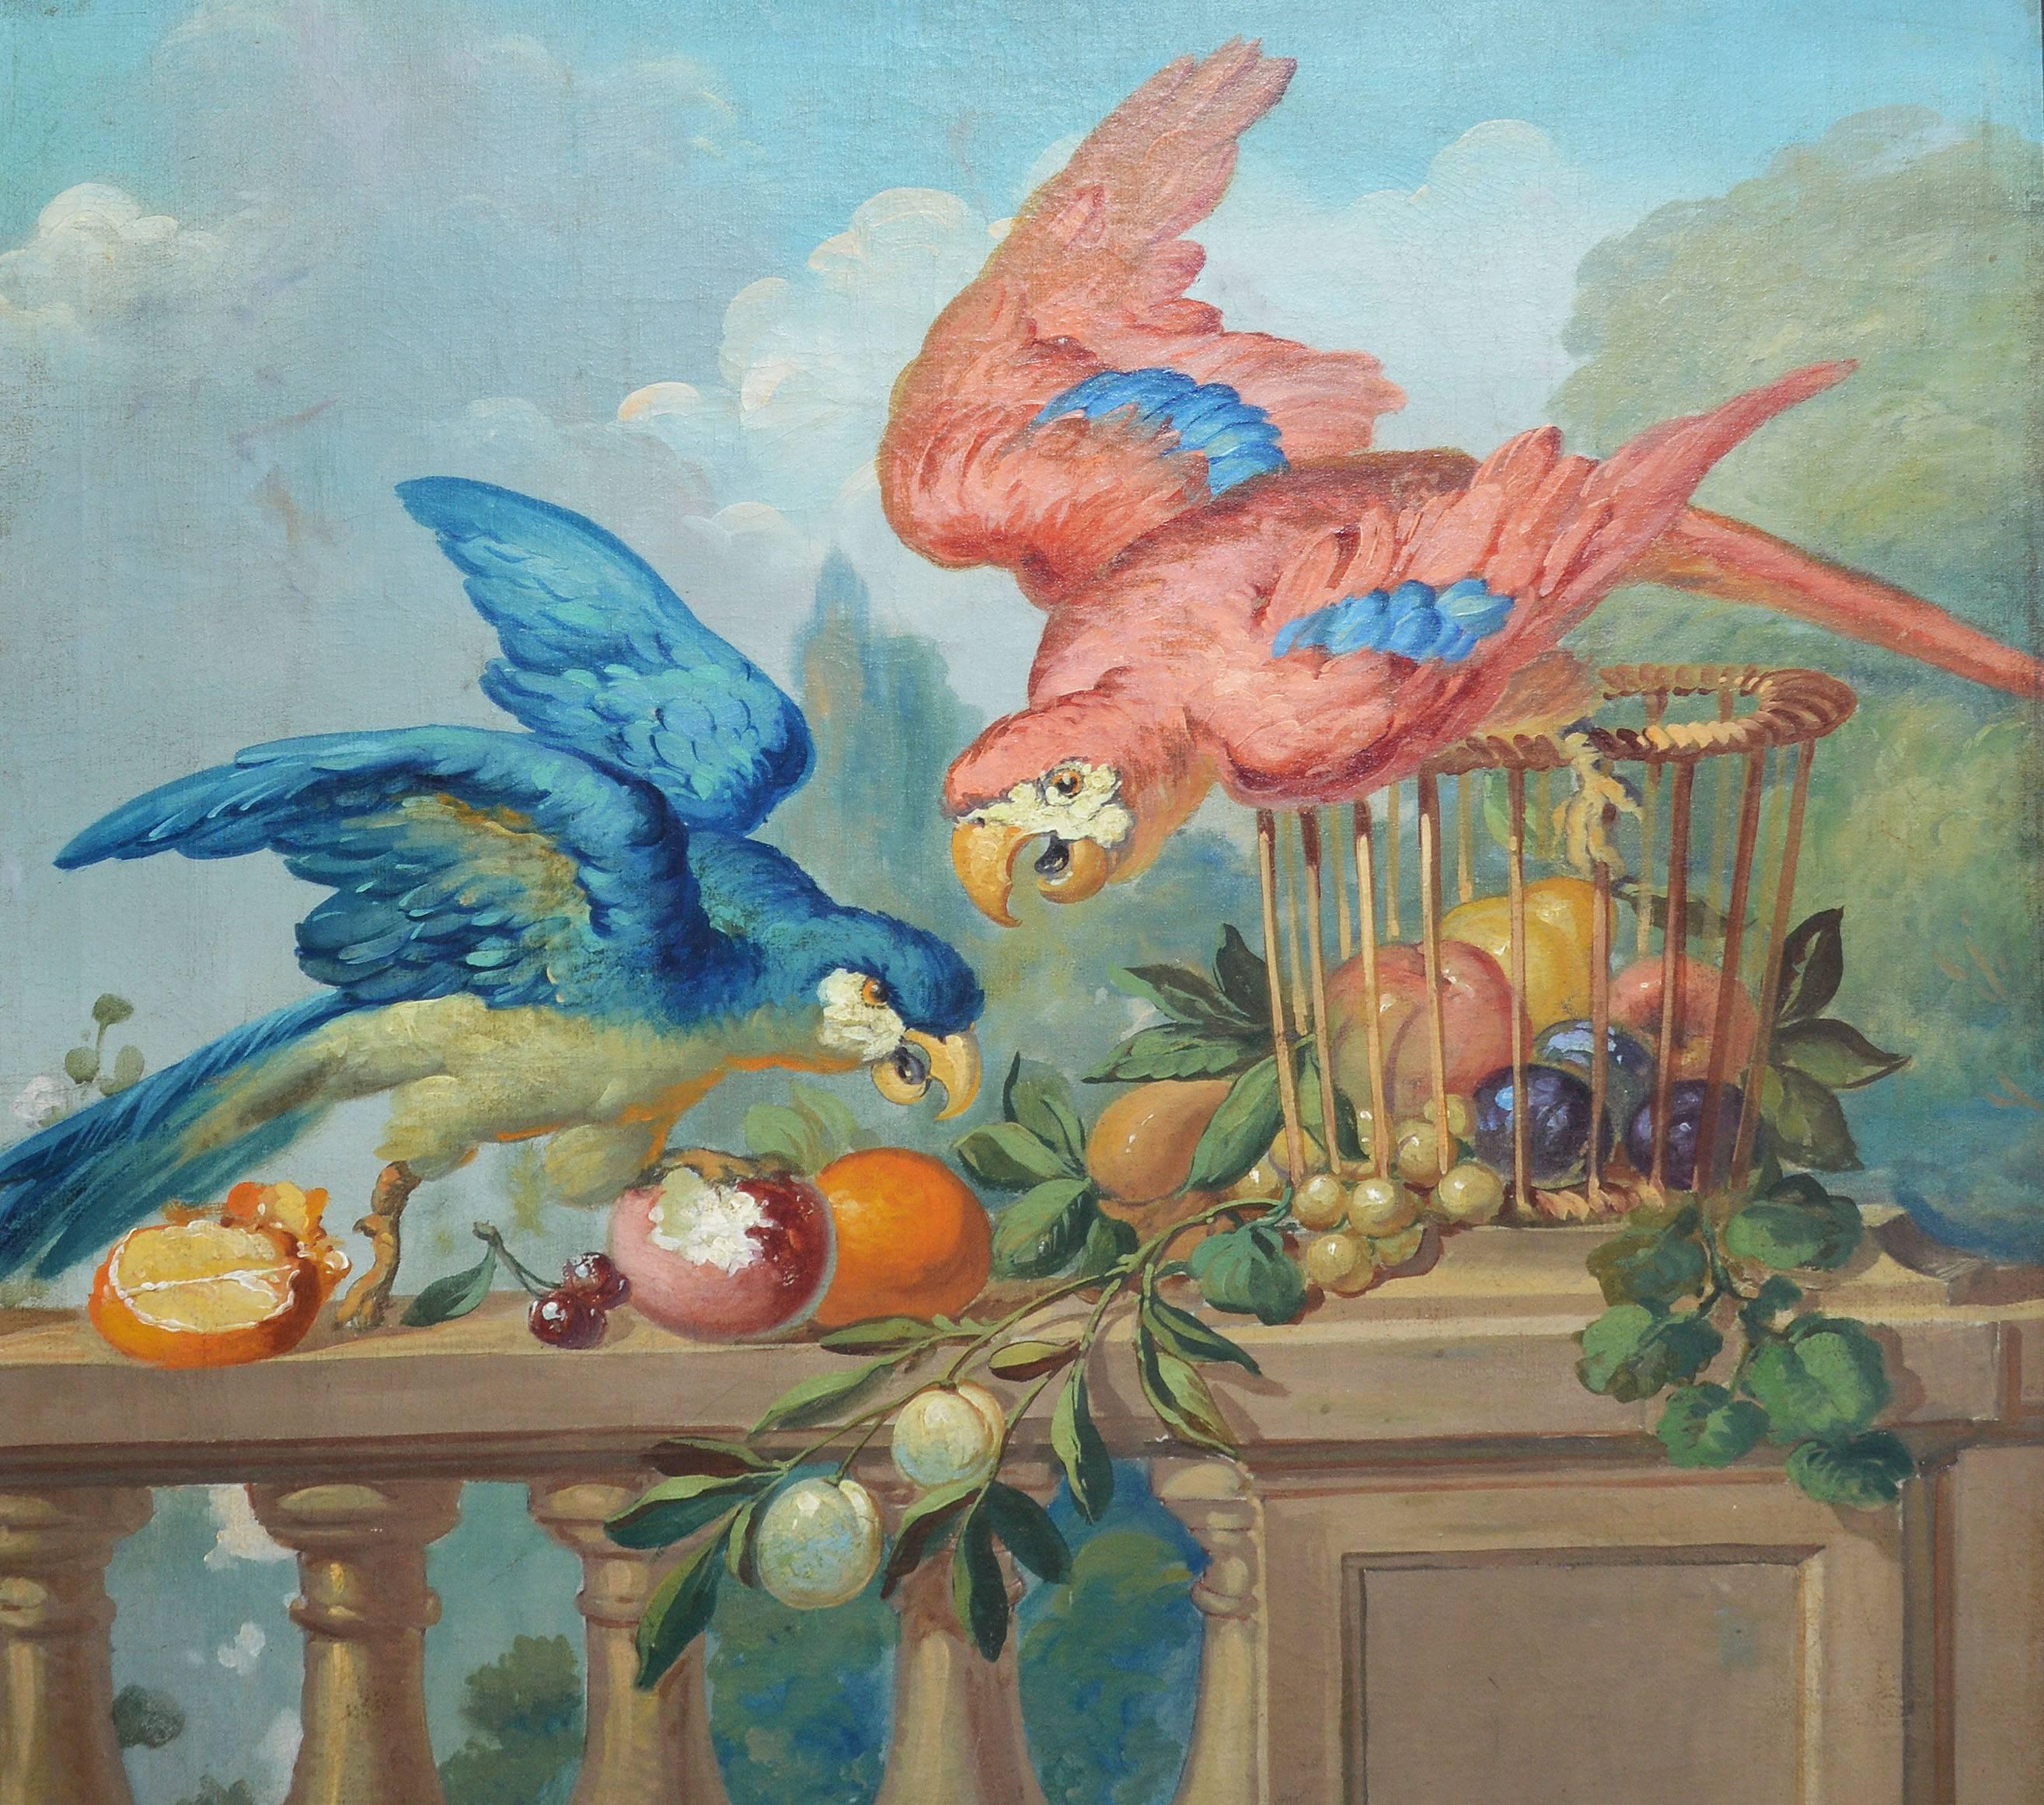 Impressionist landscape painting with parrots by Luis Granier Y Arrufi (1863-1929).  Oil on canvas, circa 1867.  Signed lower right, "Granier".  Displayed in a giltwood frame.  Image size, 33"L x 43"H, overall, 40"L x